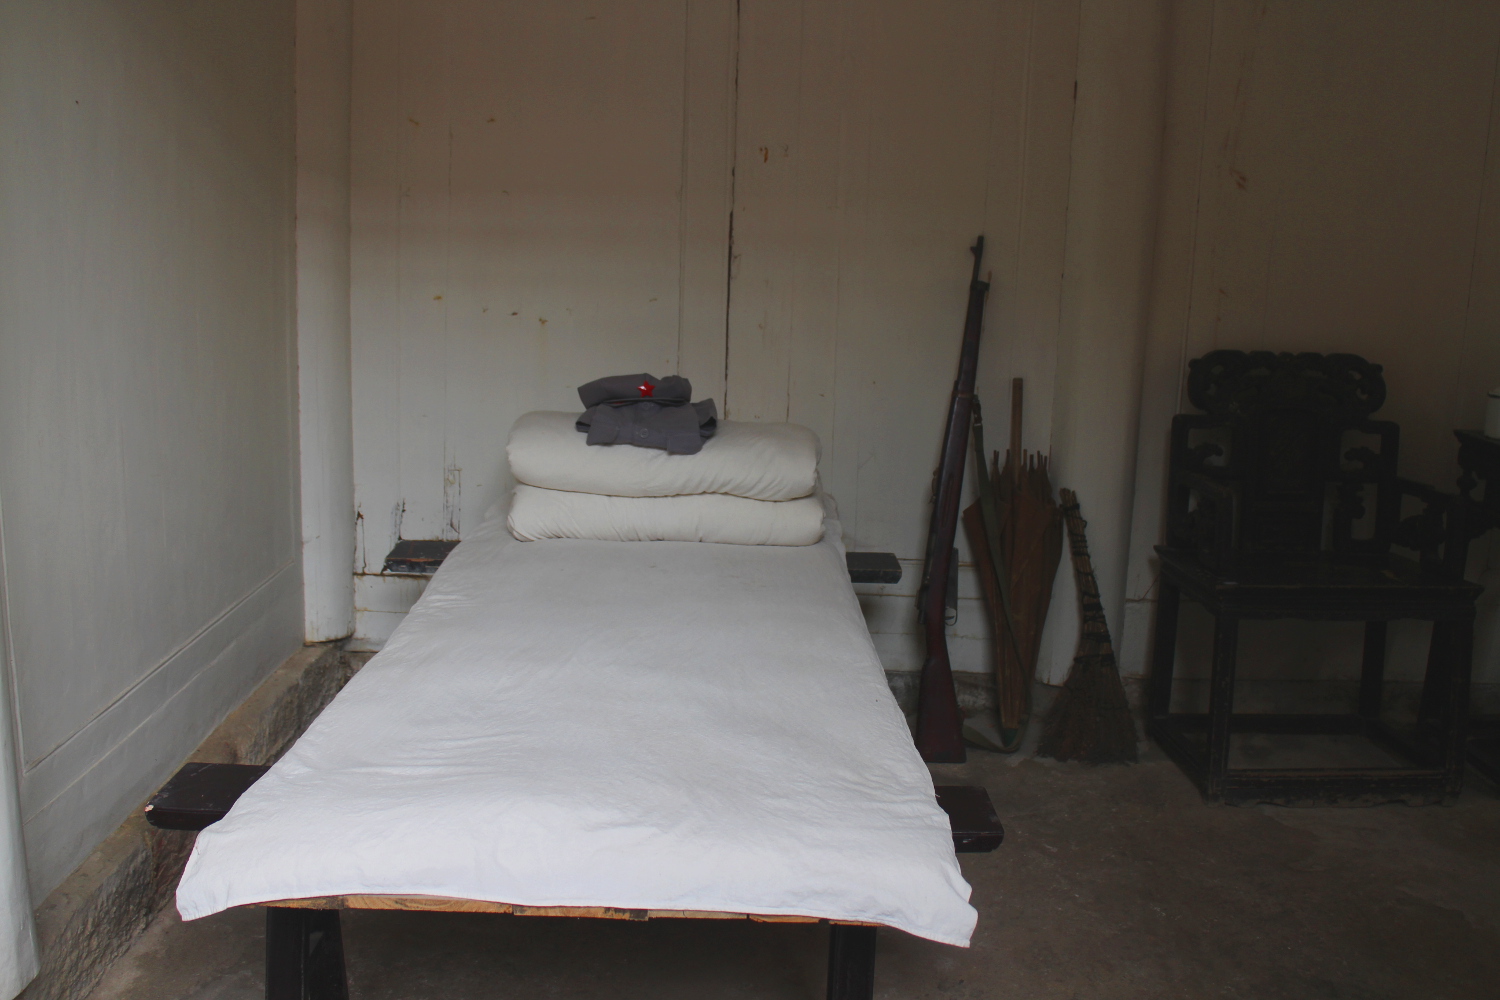 Revolutionary quarters: Red Army bedrooms carefully preserved at the Zunyi Conference Site. Image by Thomas Bird / londoninfopage